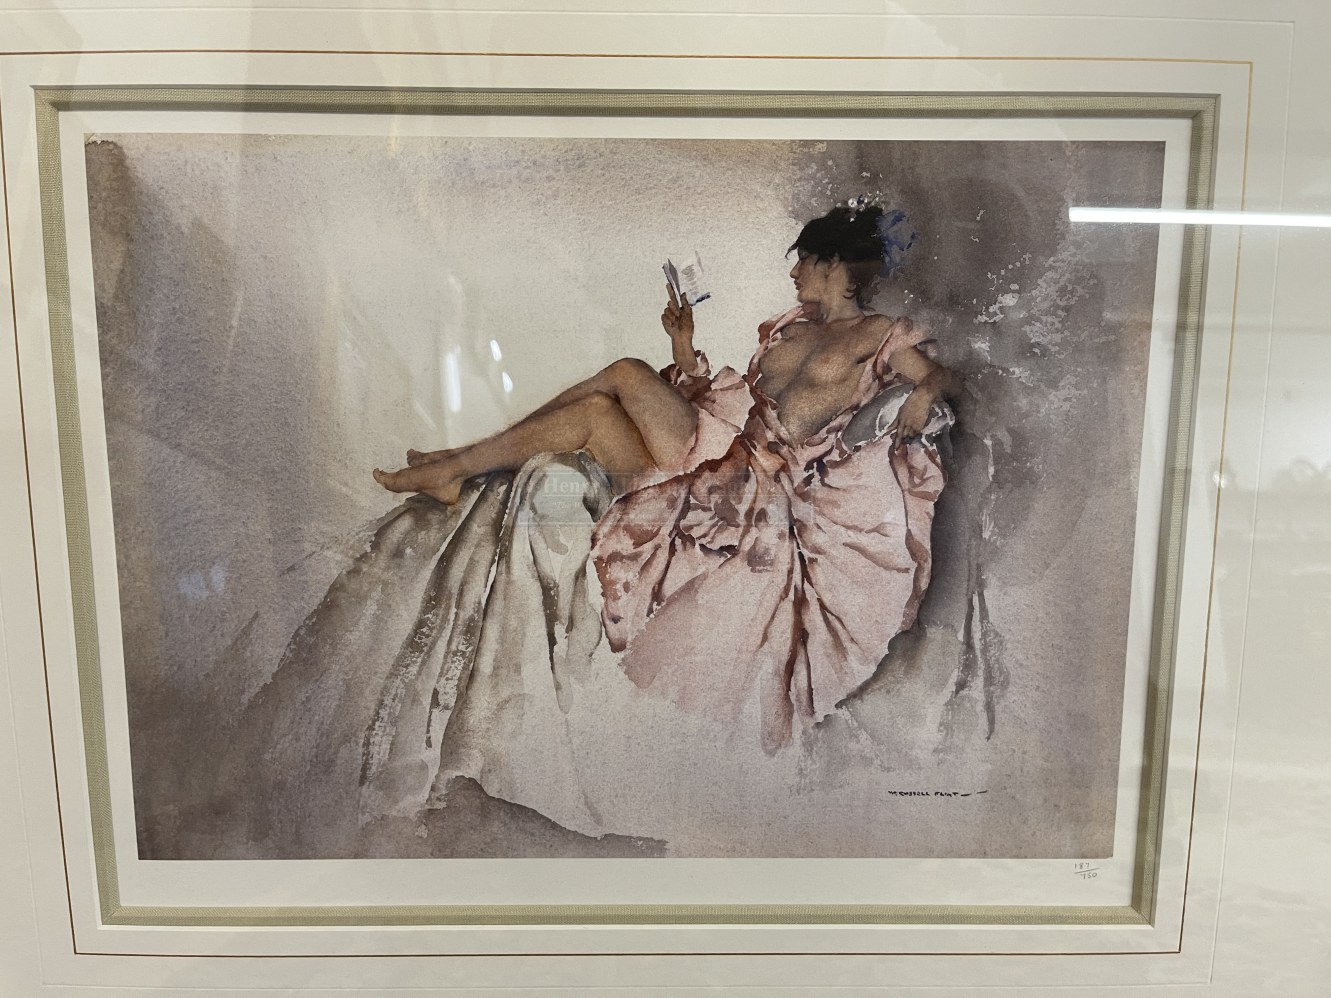 Limited Edition Prints: 20th cent. Sir William Russell Flint (1880-1969) 187/750 WRF blind stamp,